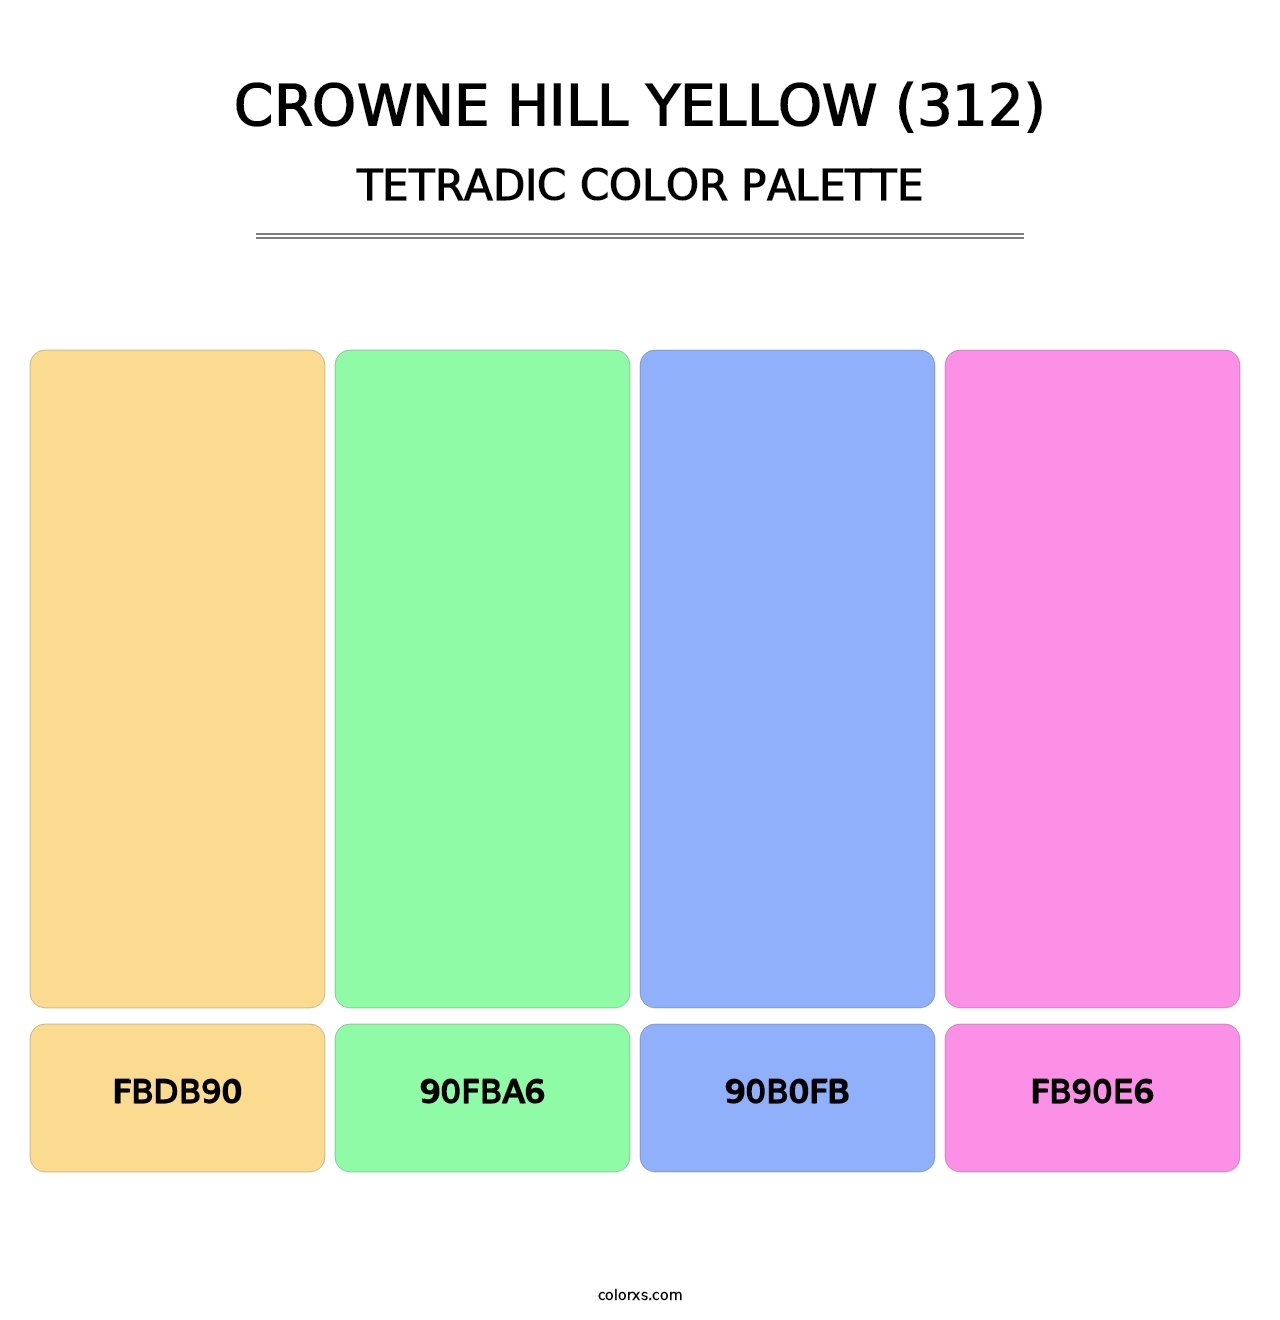 Crowne Hill Yellow (312) - Tetradic Color Palette